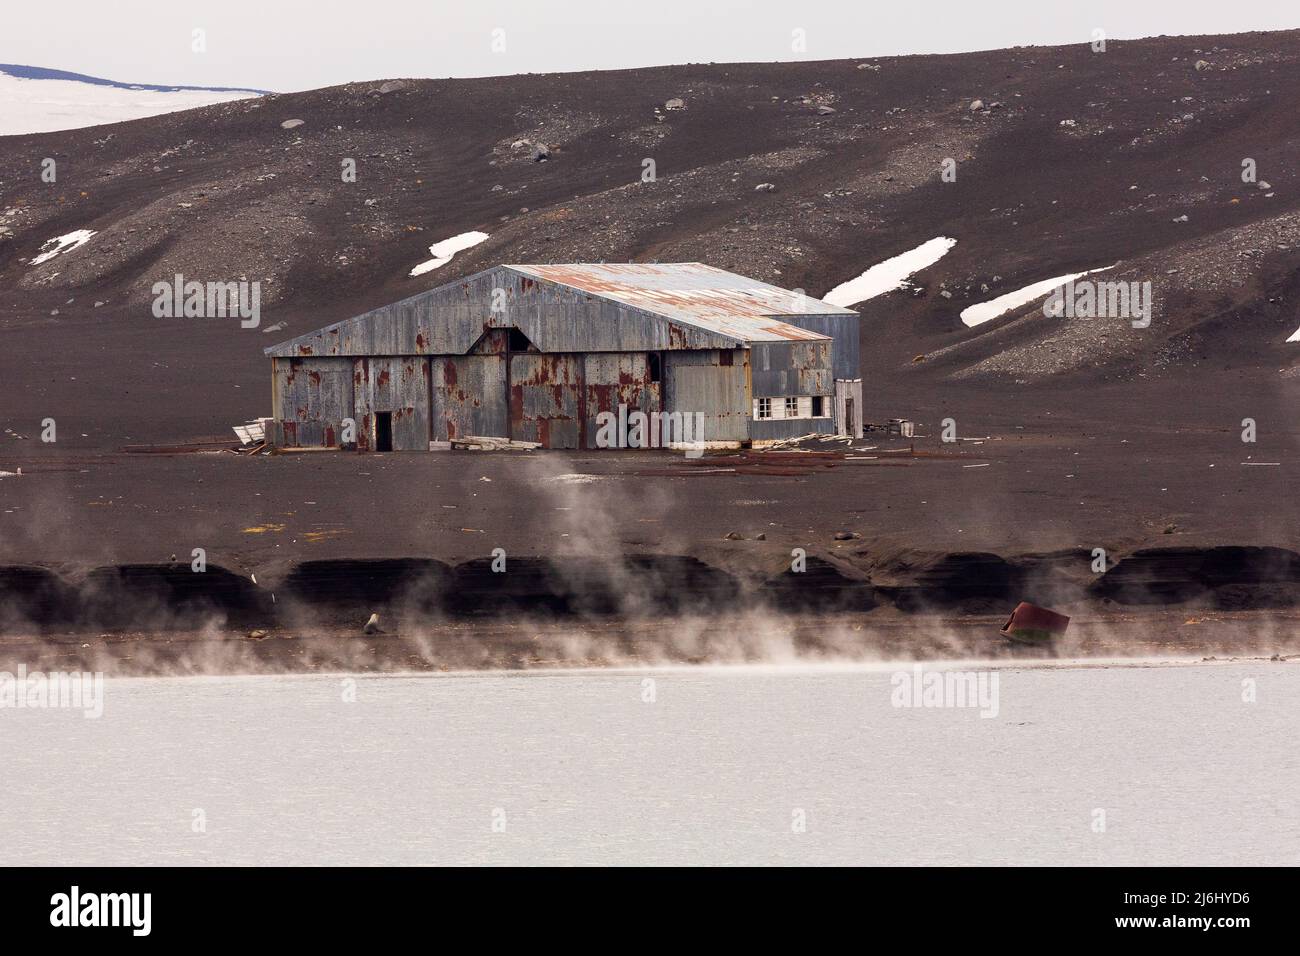 steam rises on the frozen beach in front of the dilapidated aircraft hanger of the abandoned scientific station of deception island antarctica Stock Photo